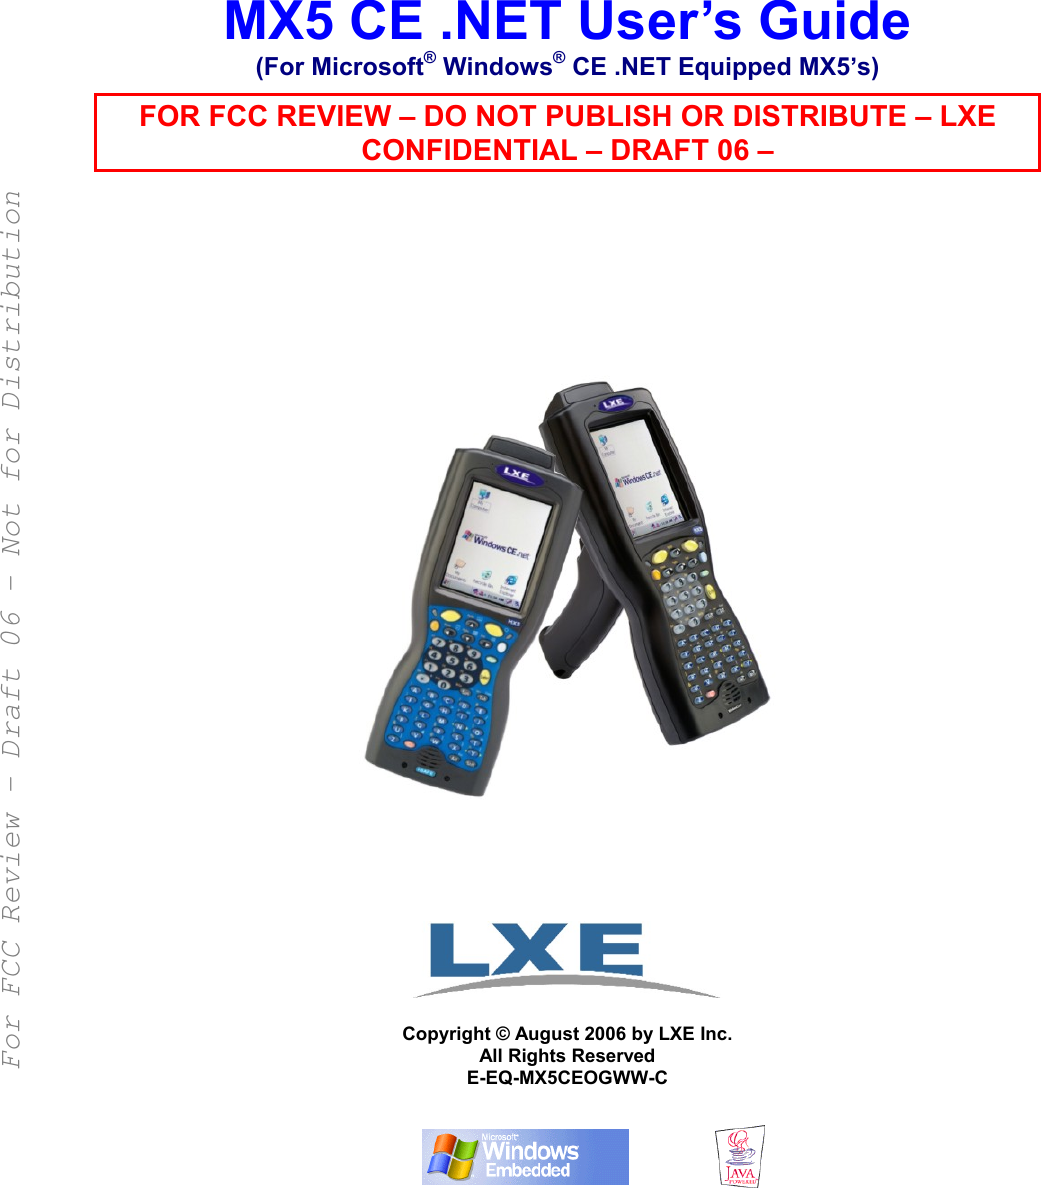      MX5 CE .NET User’s Guide (For Microsoft® Windows® CE .NET Equipped MX5’s) FOR FCC REVIEW – DO NOT PUBLISH OR DISTRIBUTE – LXE CONFIDENTIAL – DRAFT 06 –                    Copyright © August 2006 by LXE Inc. All Rights Reserved E-EQ-MX5CEOGWW-C       For FCC Review - Draft 06 - Not for Distribution